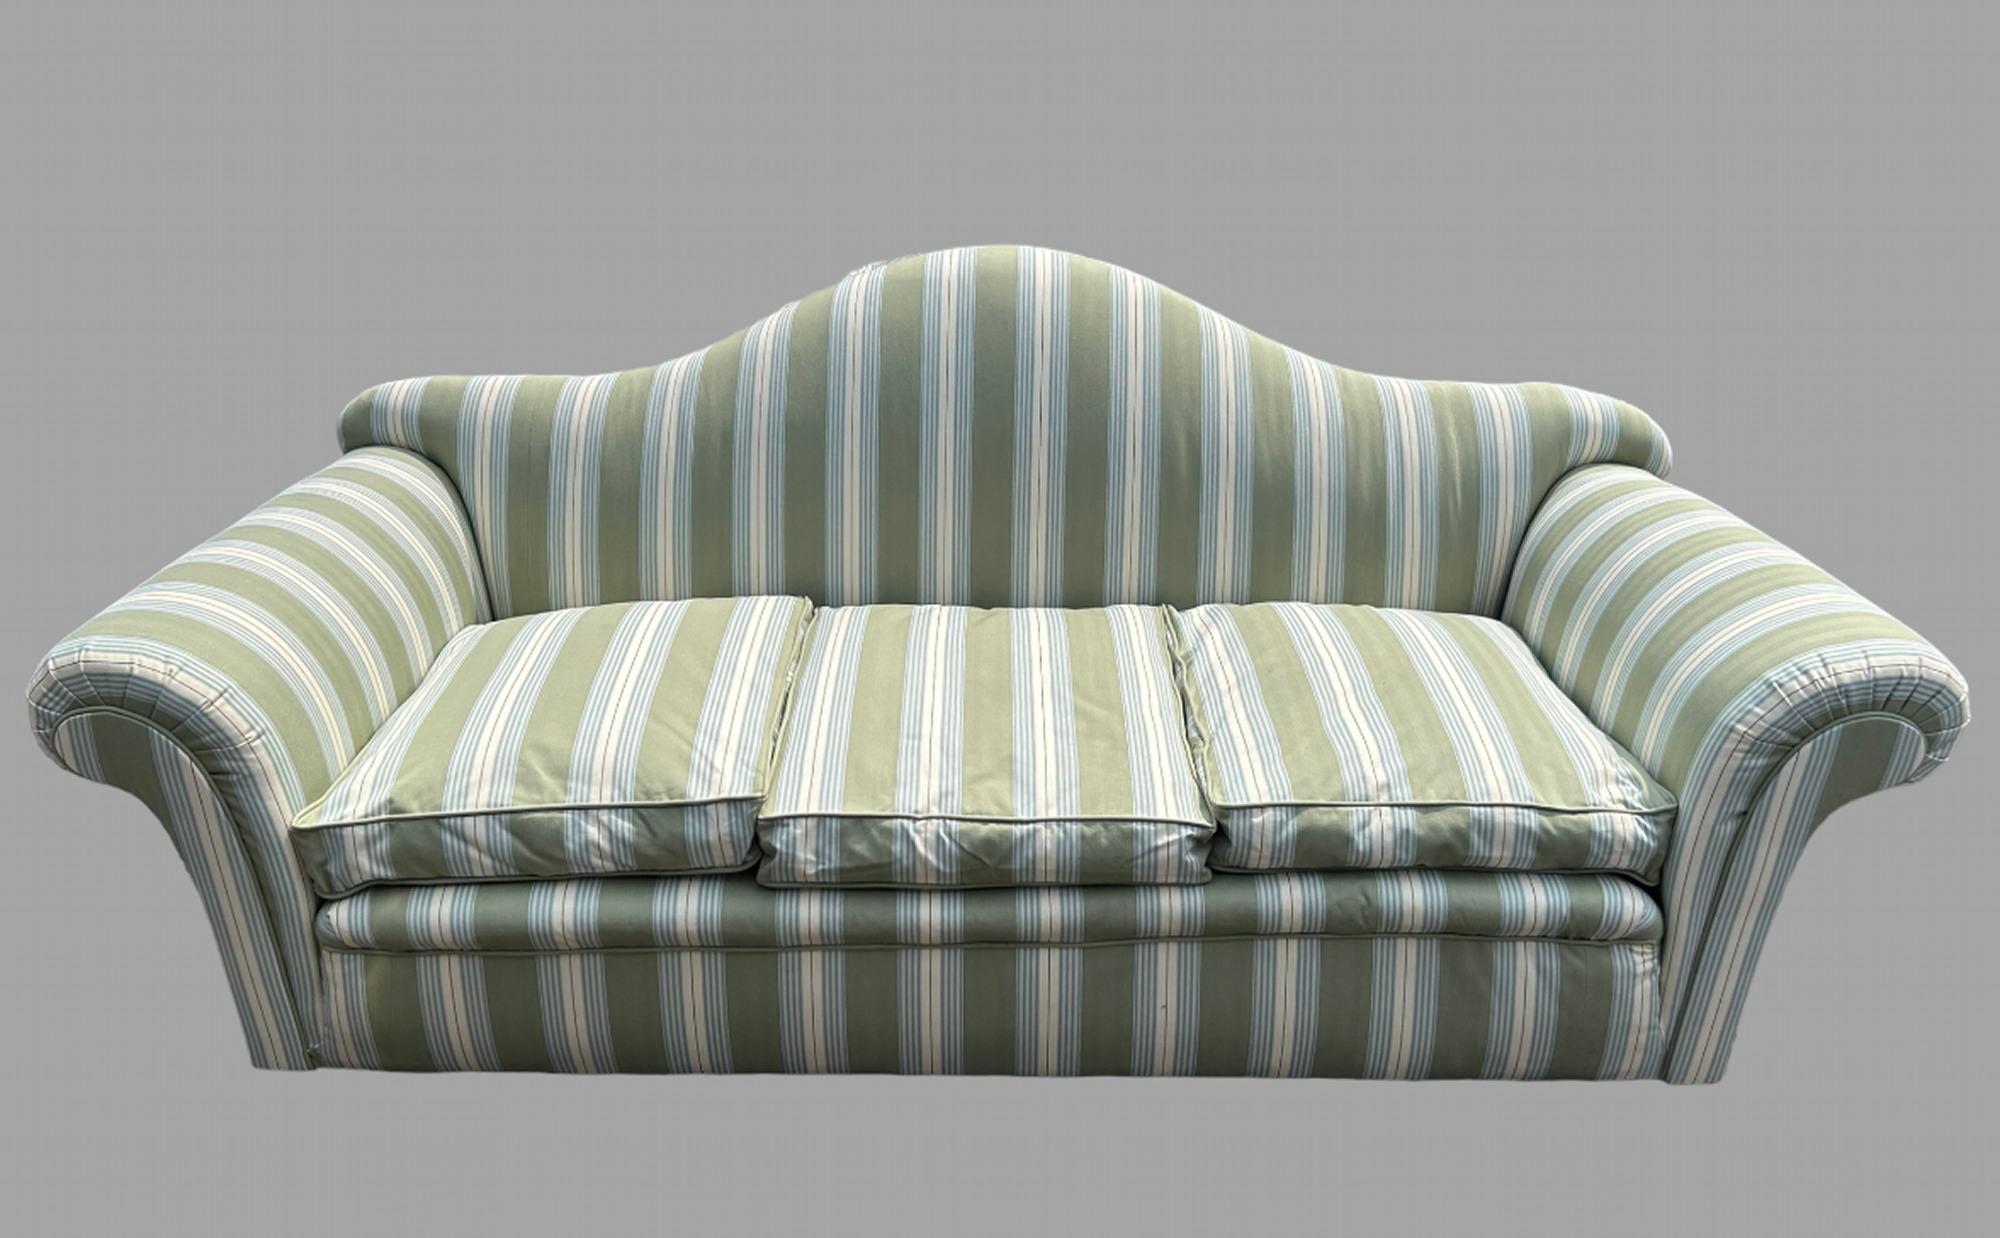 A 19th Century Camel Backed Sofa that has been professionally recovered in an Ian Mankin 'Panama Stripe' sea green/sage colourway with Arm Height 63 cm and Seat height 46 cm